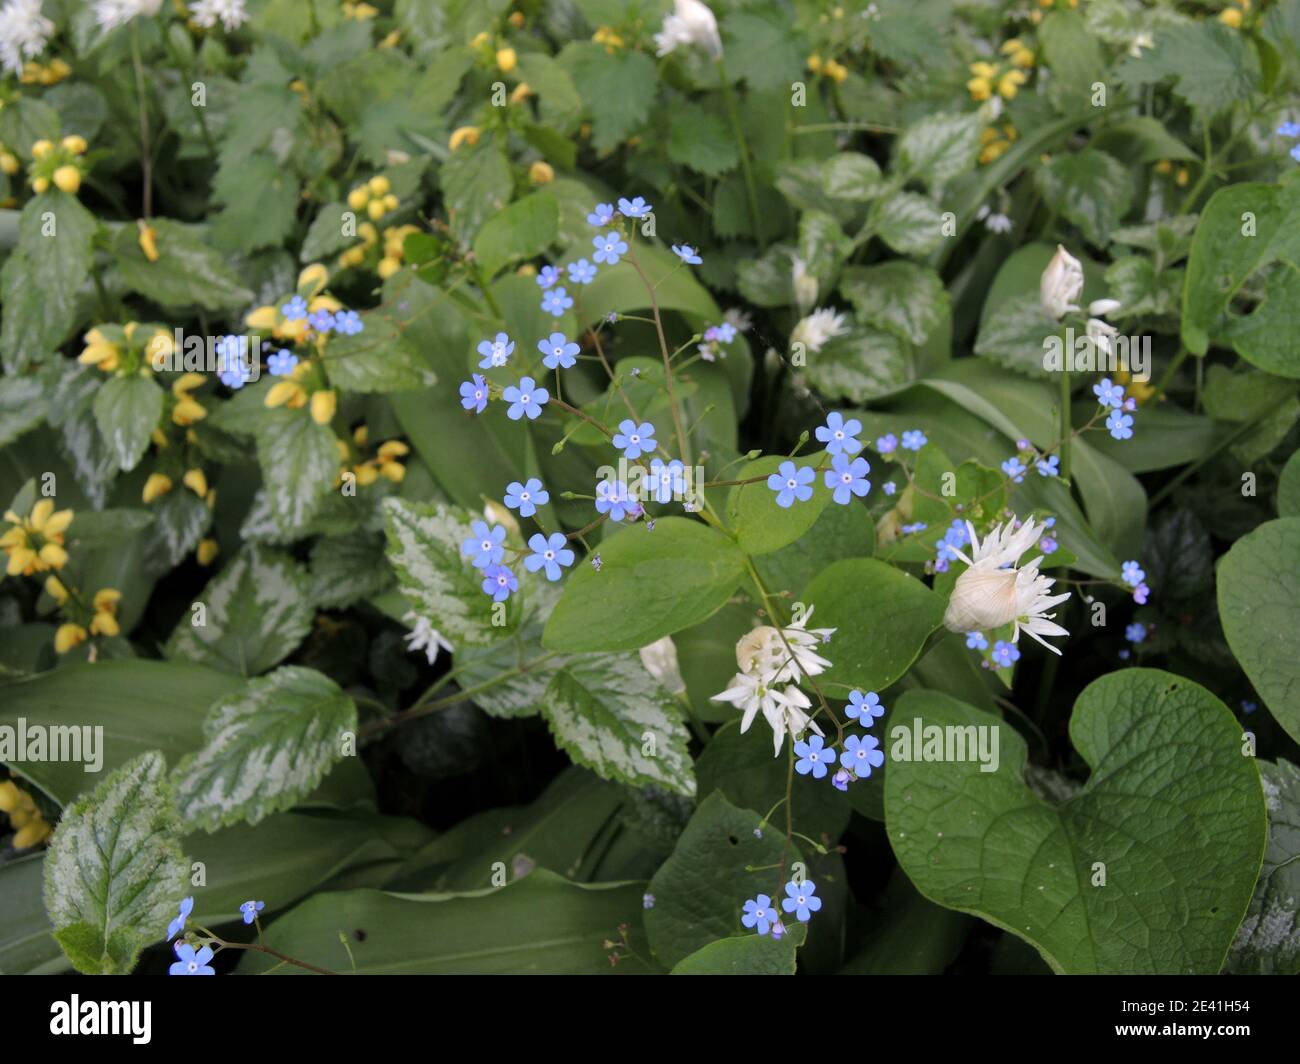 Heartleaf brunnera, Siberian bugloss (Brunnera macrophylla), blooming in a flowerbed with ramson and Stock Photo